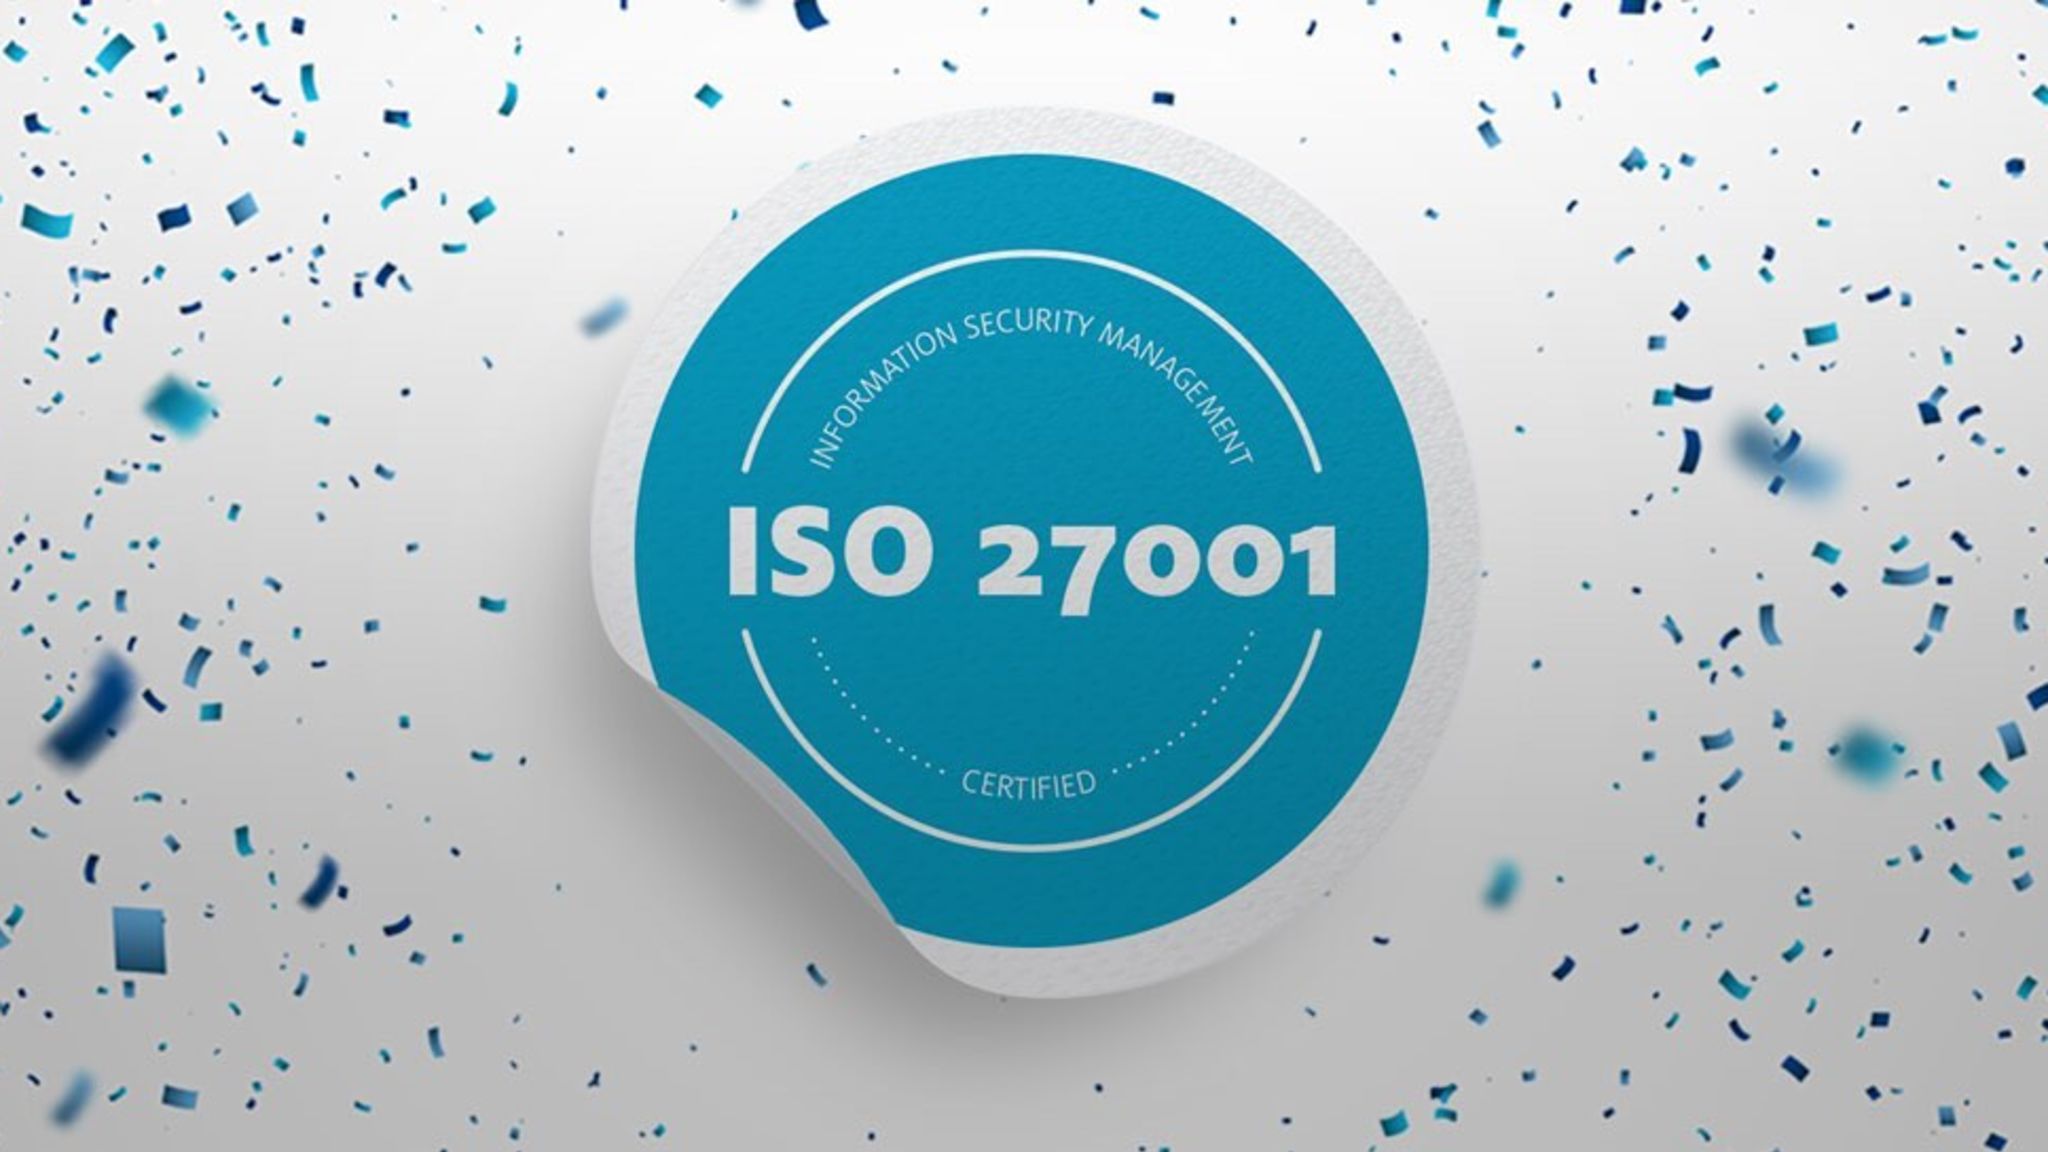 How to Maintain ISO 27001 Certification?